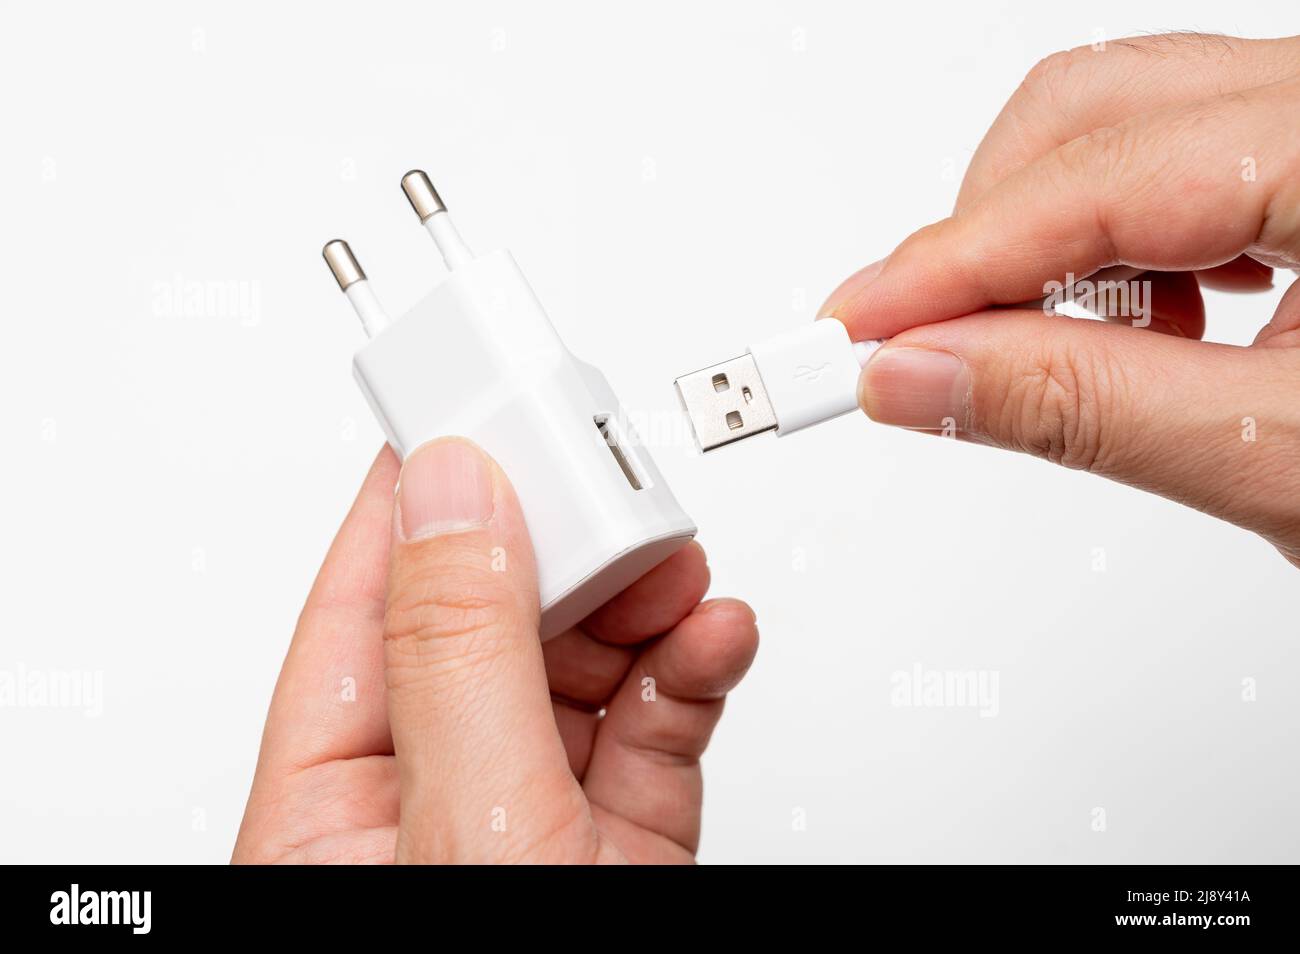 Male hand connecting USB cable to charging adapter. Stock Photo